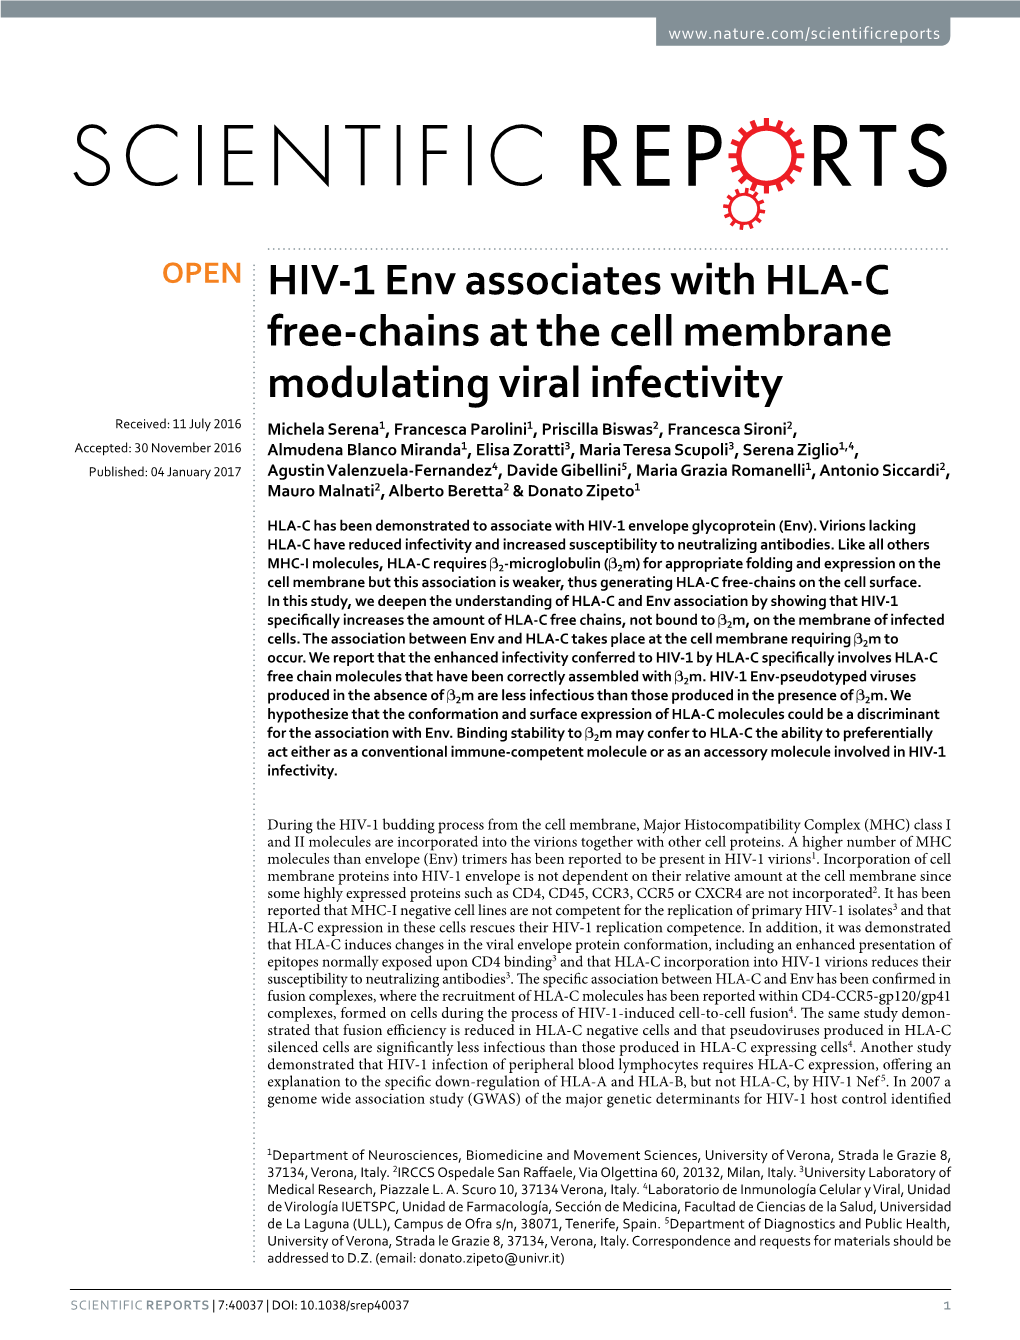 HIV-1 Env Associates with HLA-C Free-Chains at the Cell Membrane